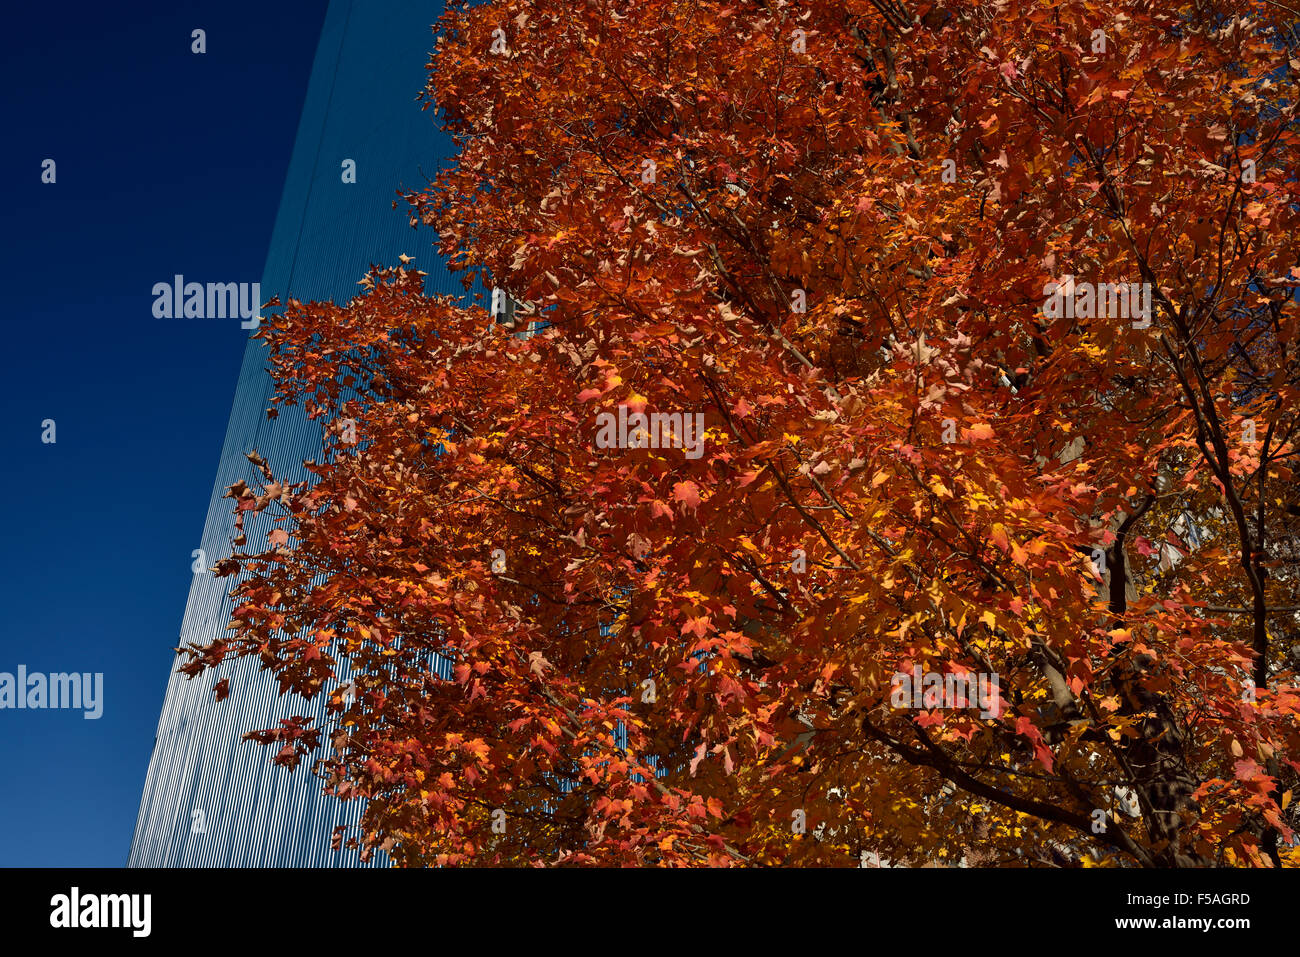 Red Maple tree in the Fall with blue cladding on highrise apartment building Stock Photo